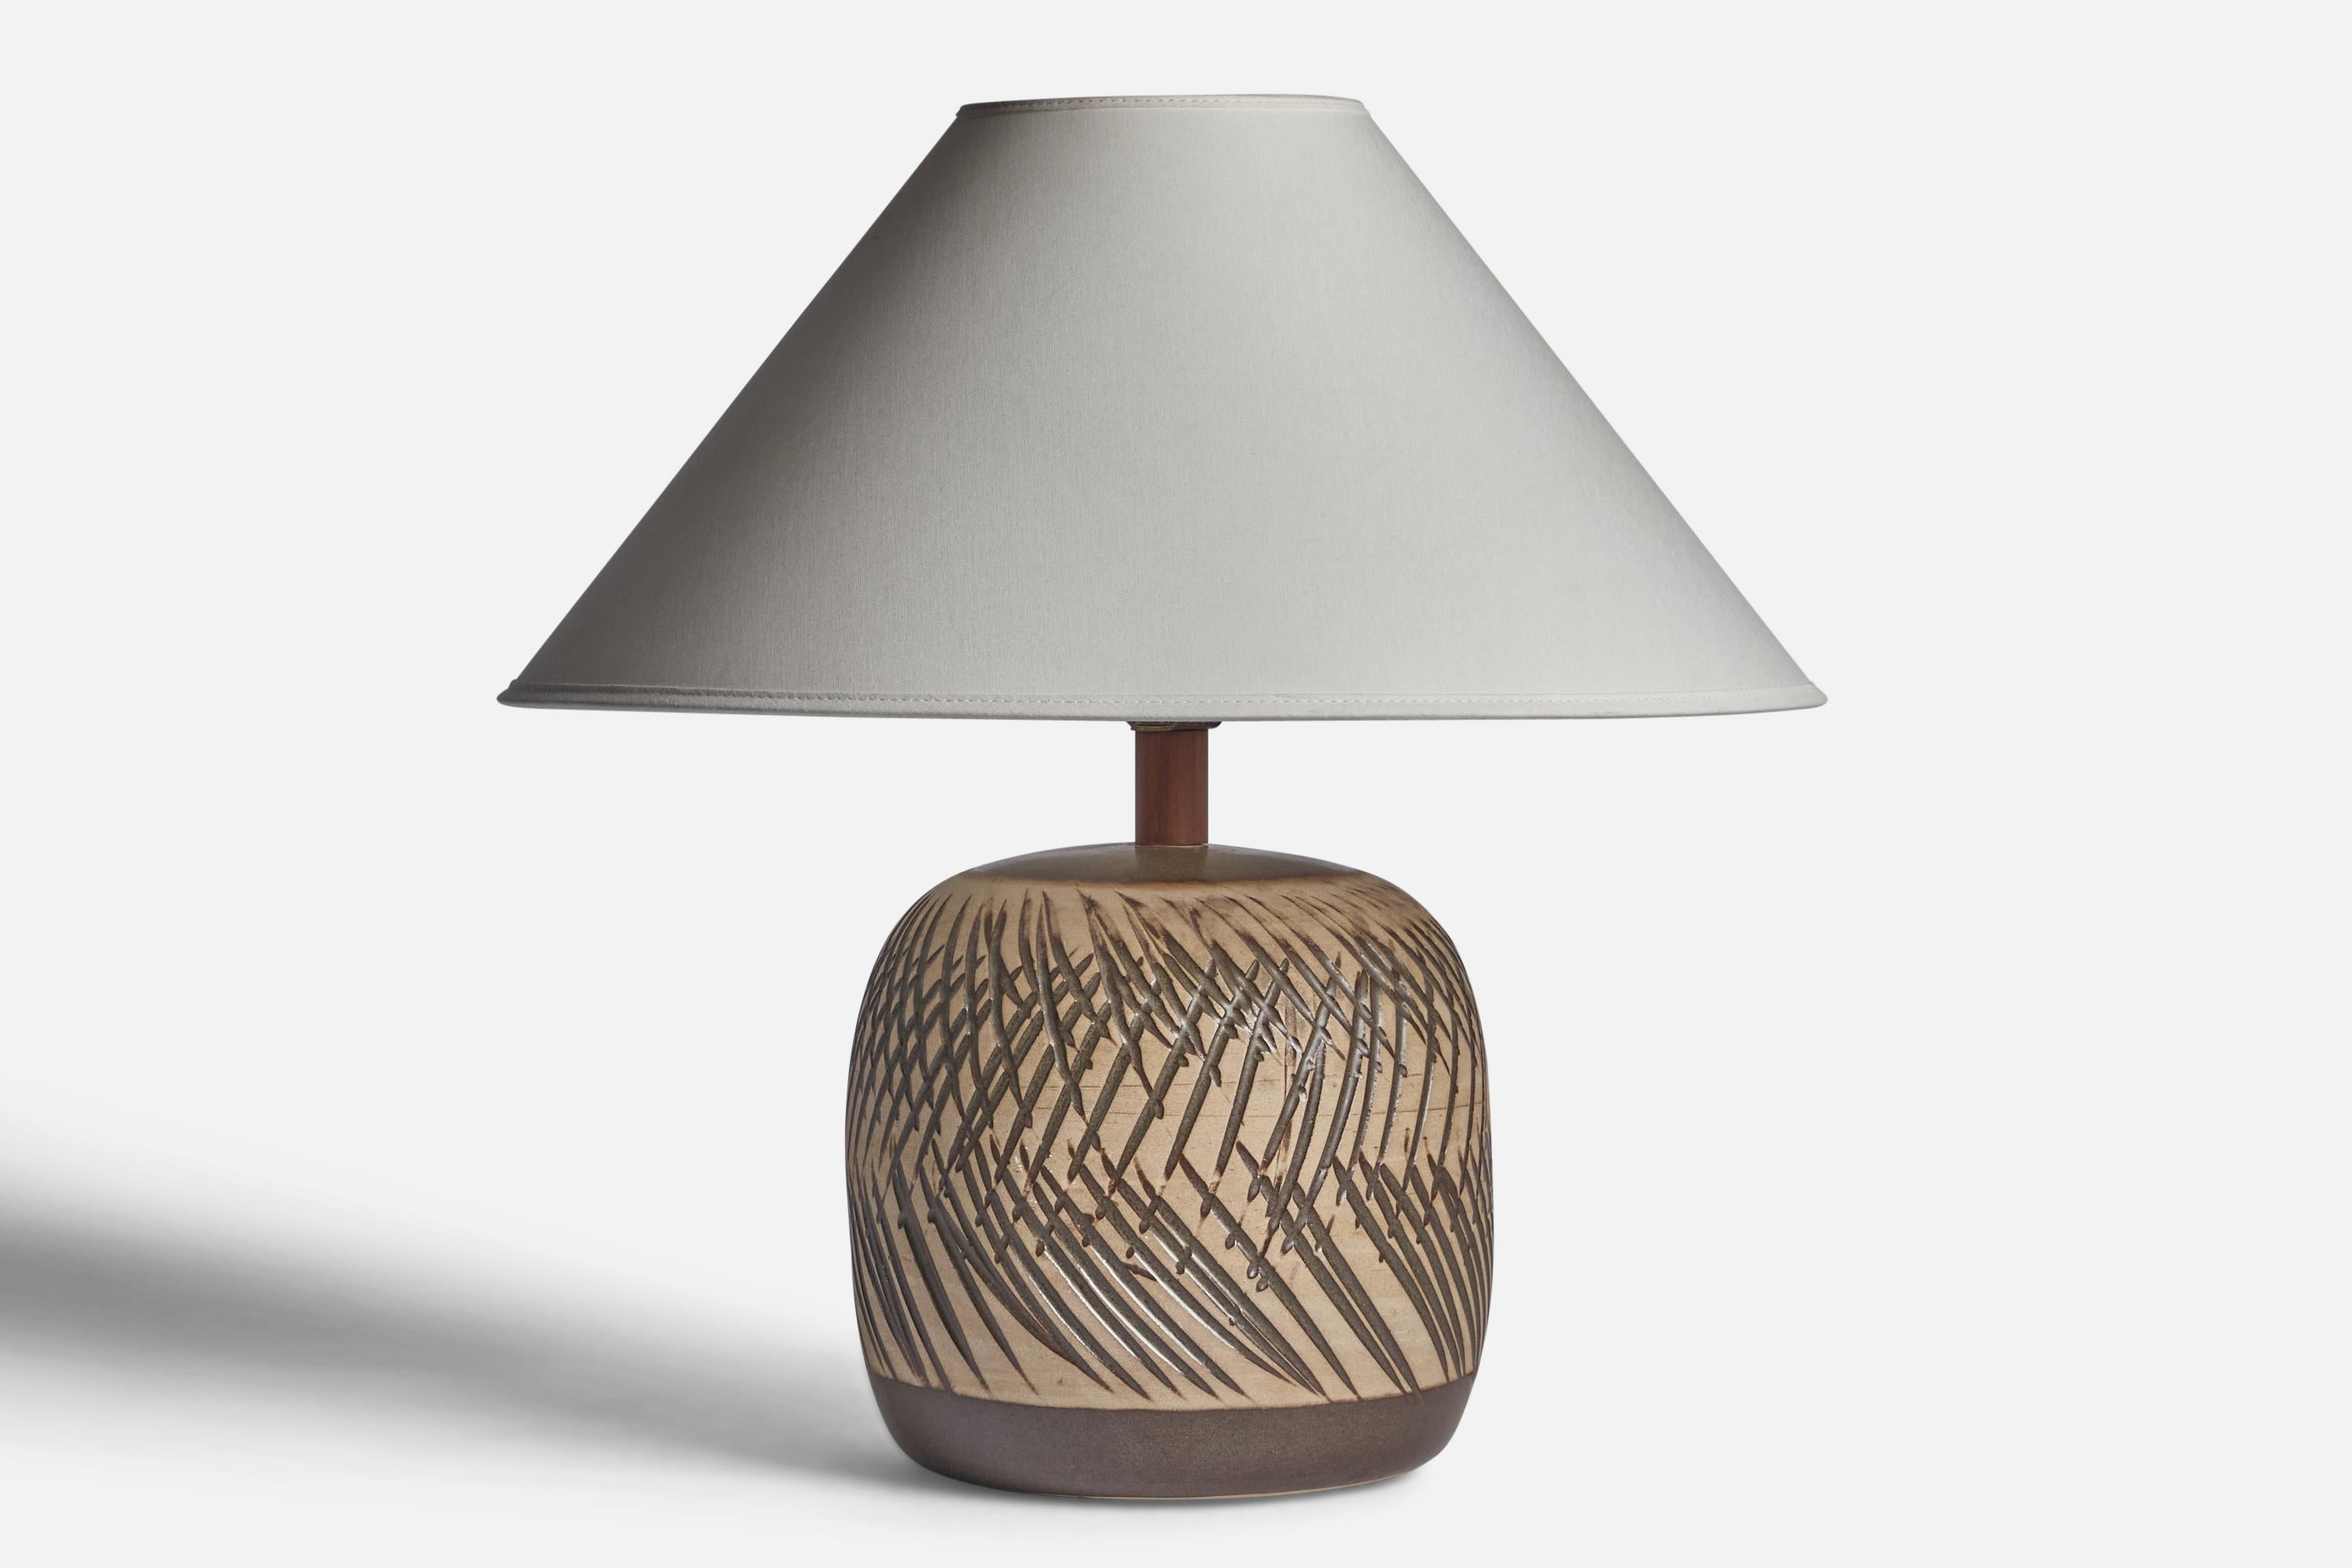 A grey and beige-glazed ceramic and walnut table lamp designed by Jane & Gordon Martz and produced by Marshall Studios, USA, 1960s.

Dimensions of Lamp (inches): 12” H x 7.5” Diameter

Dimensions of Shade (inches): 4.5” Top Diameter x 16” Bottom